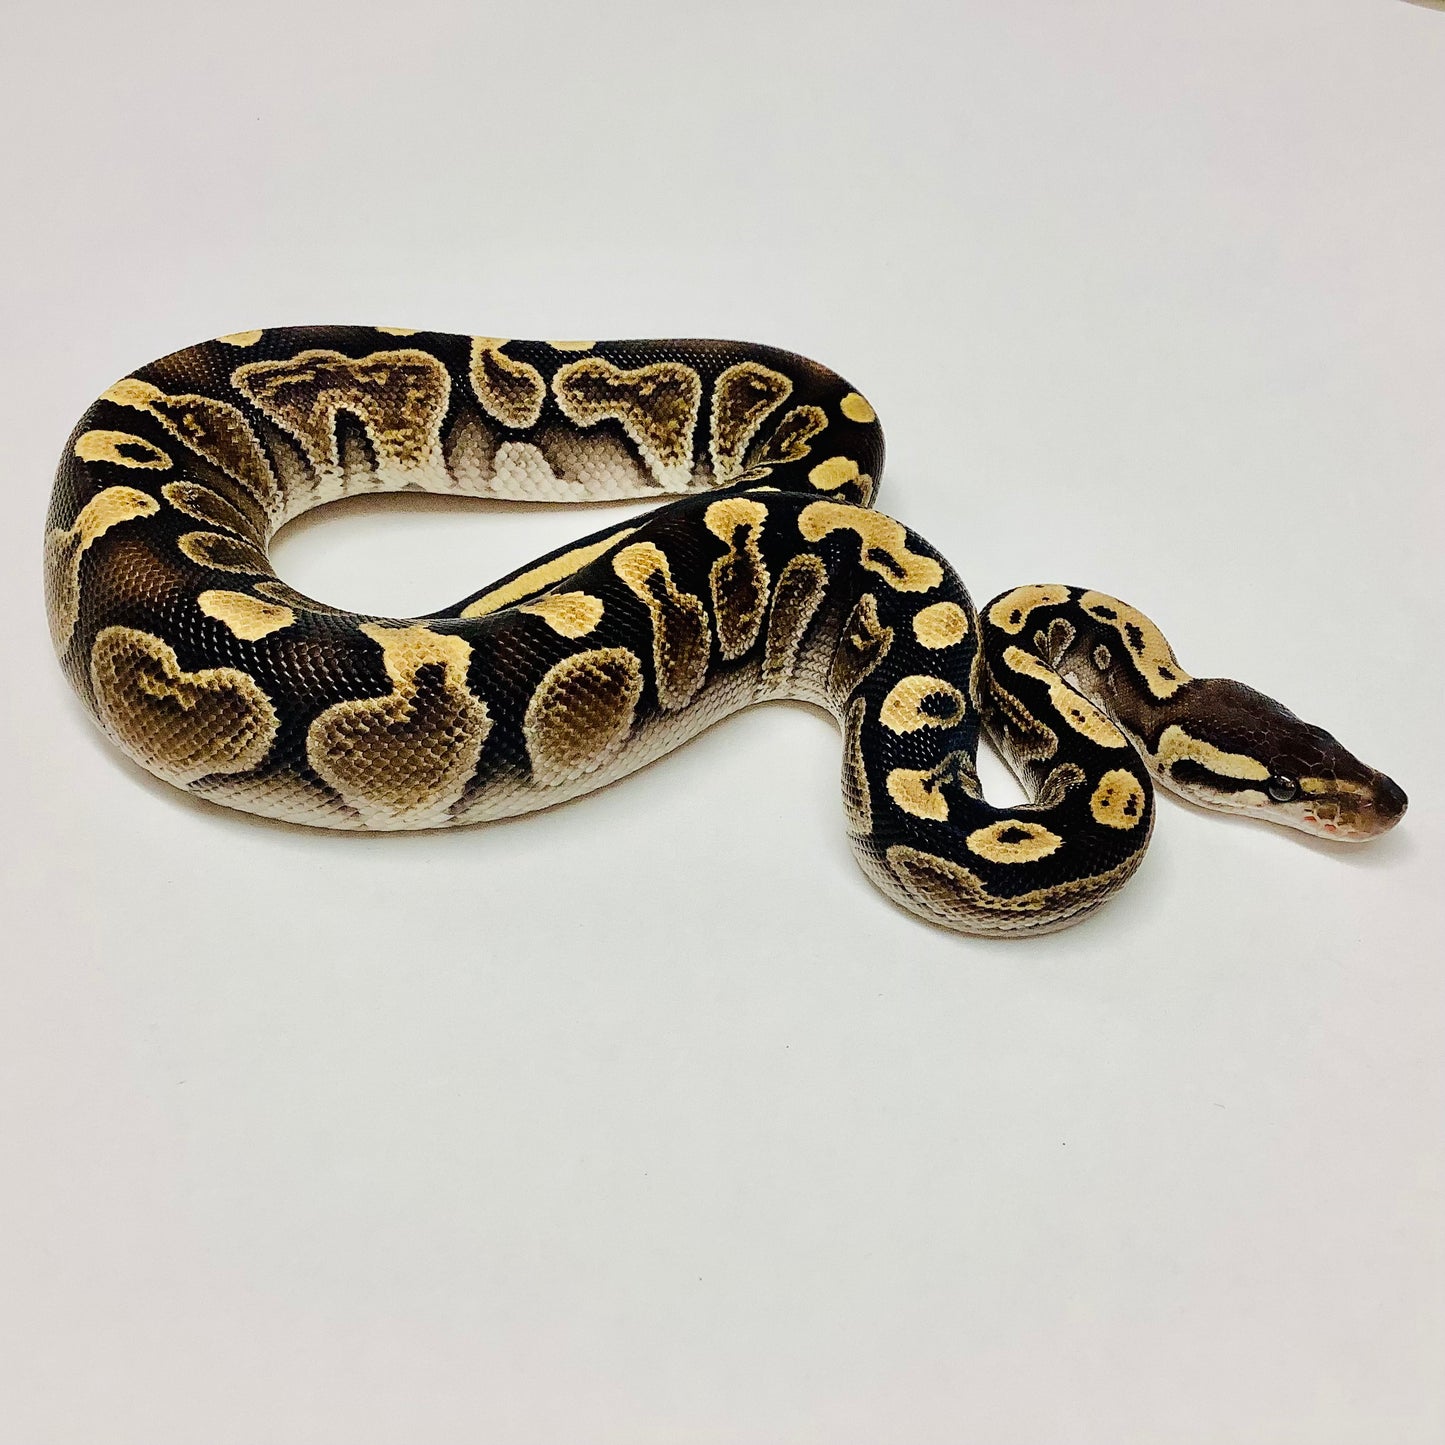 GHI Het Russo Ball Python - Male #2021M02